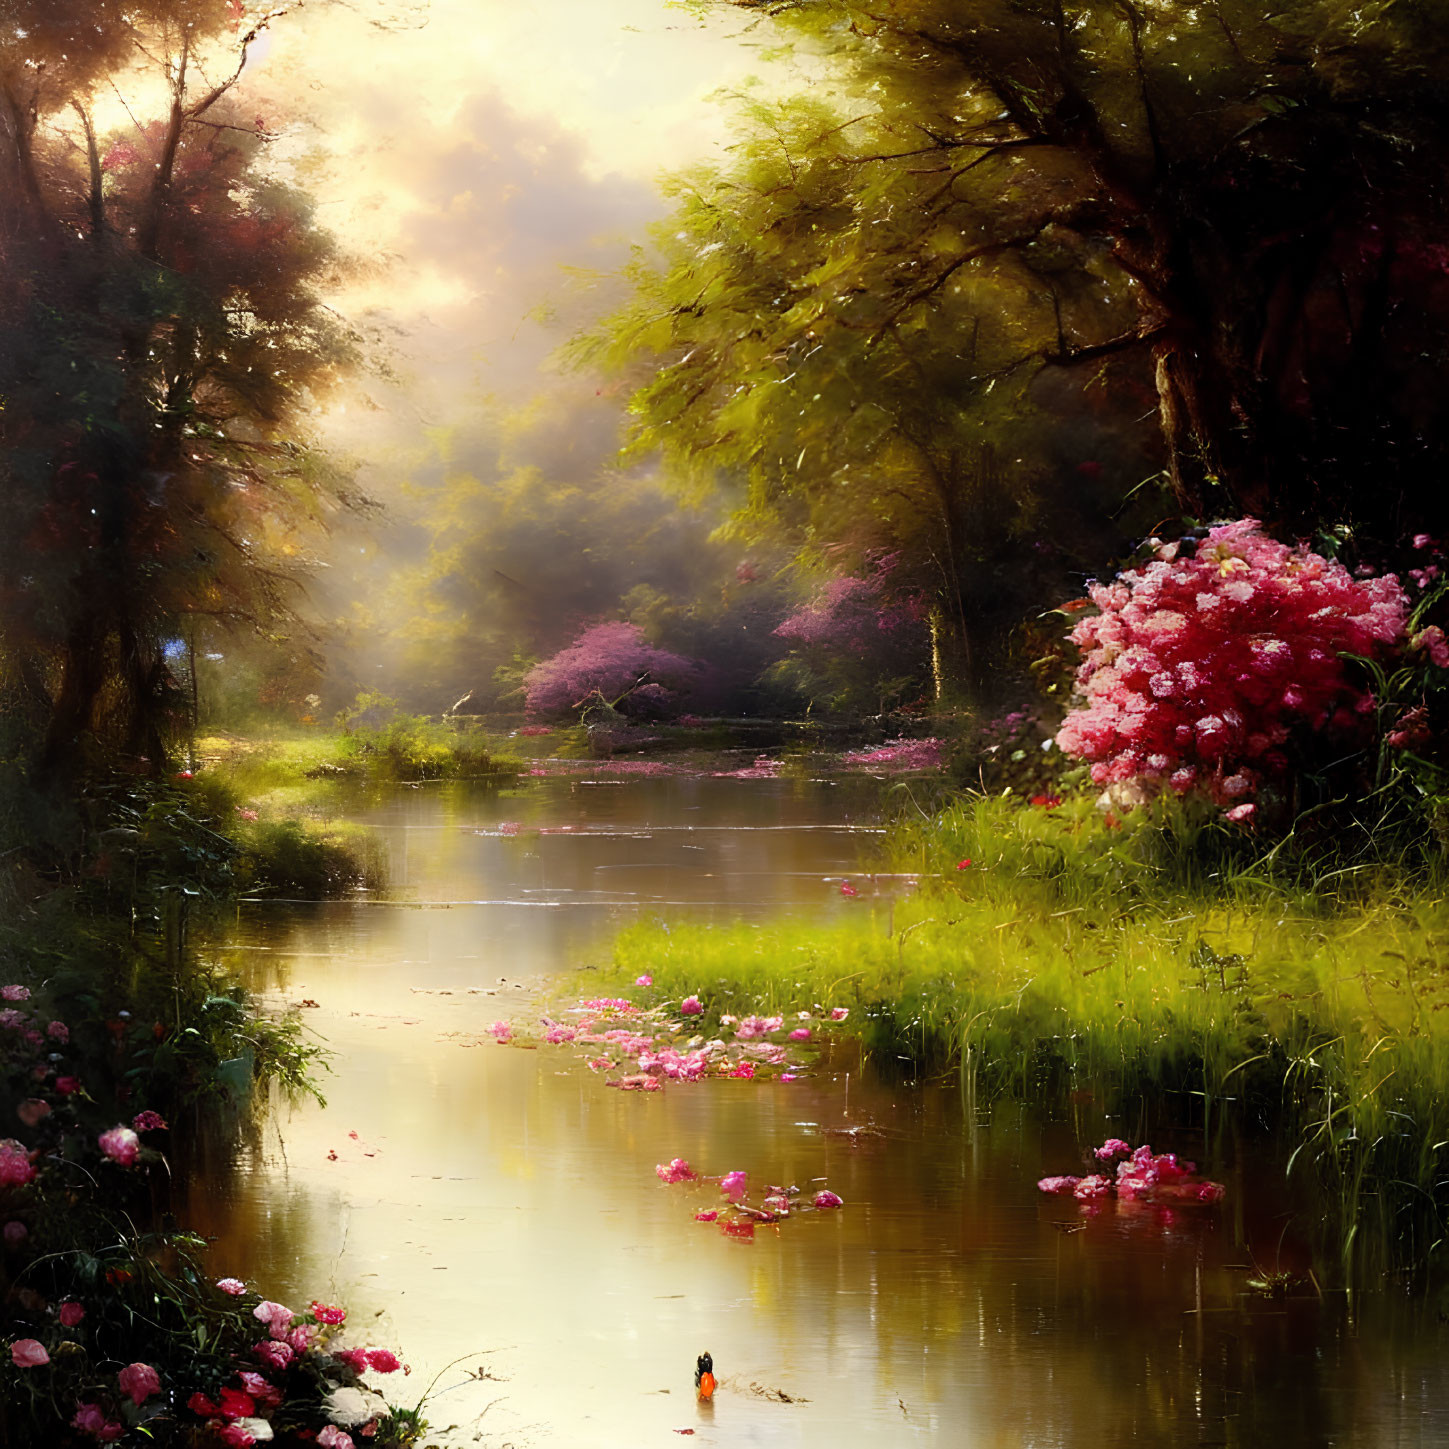 Tranquil river amidst greenery and blooming flowers